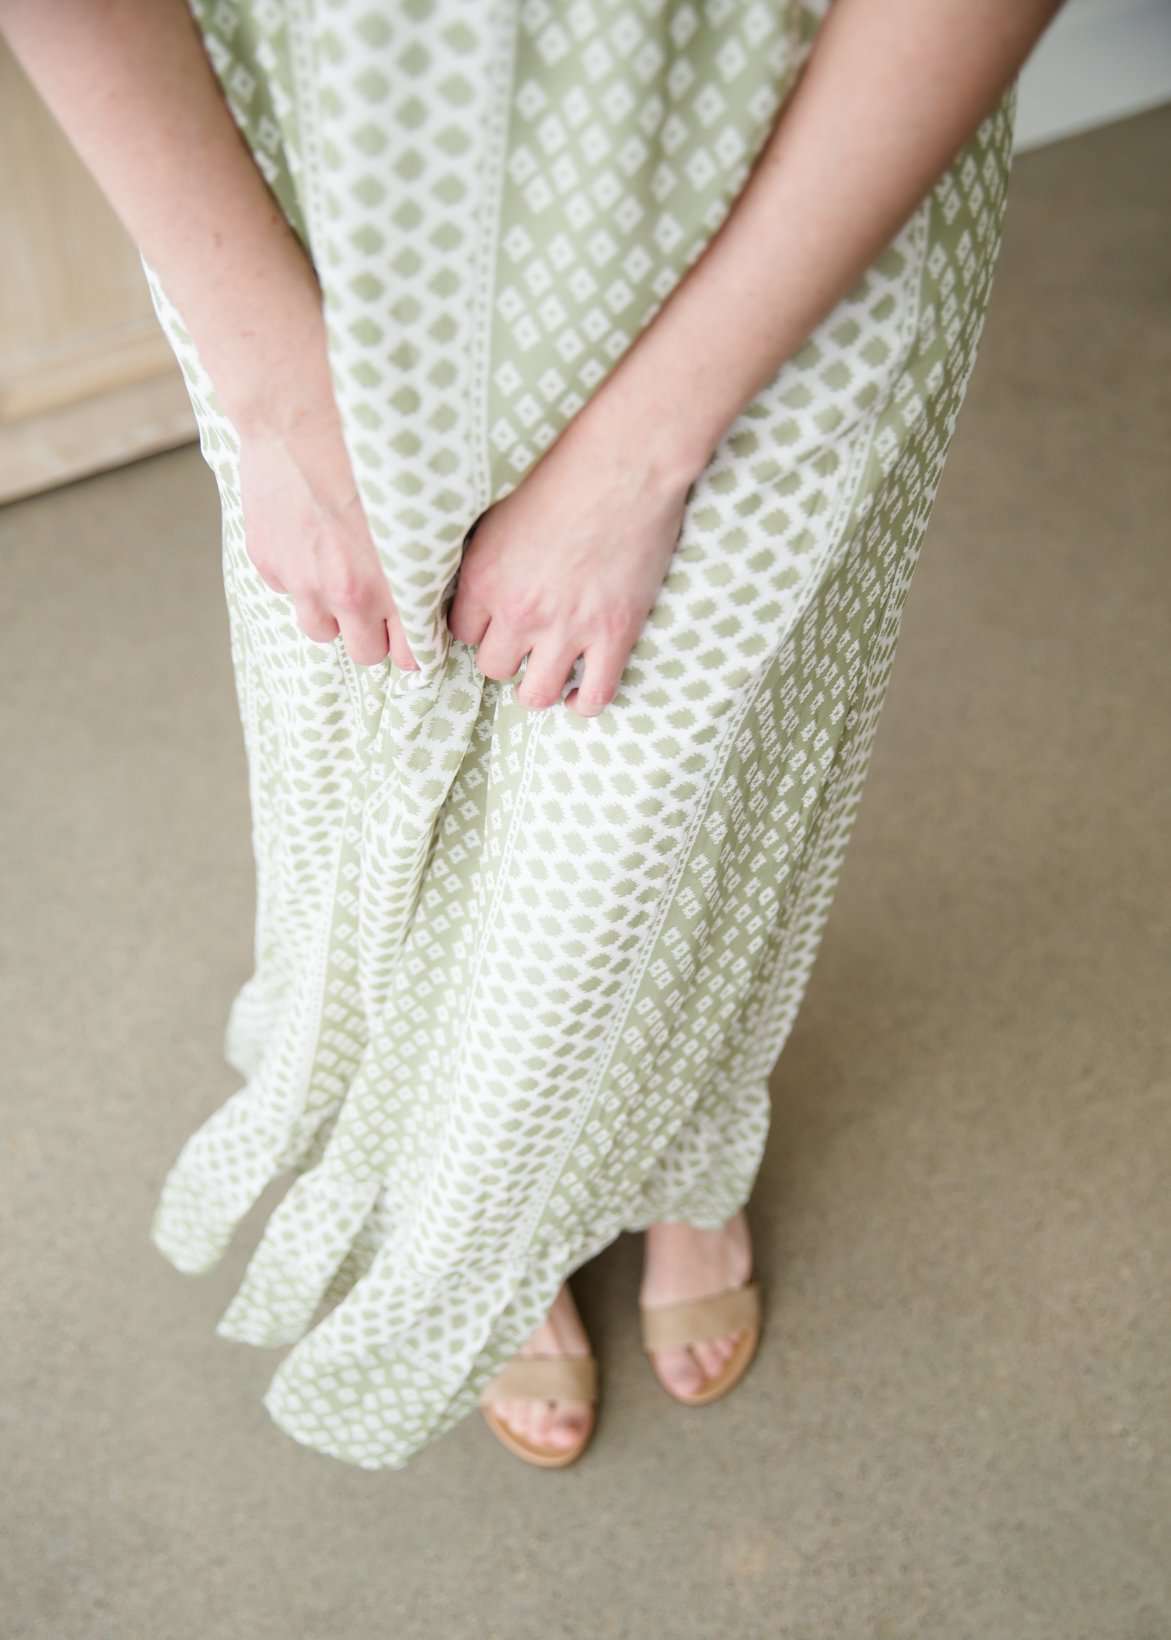 Green polka dot ditsy print maxi dress with flutter sleeves and faux button front